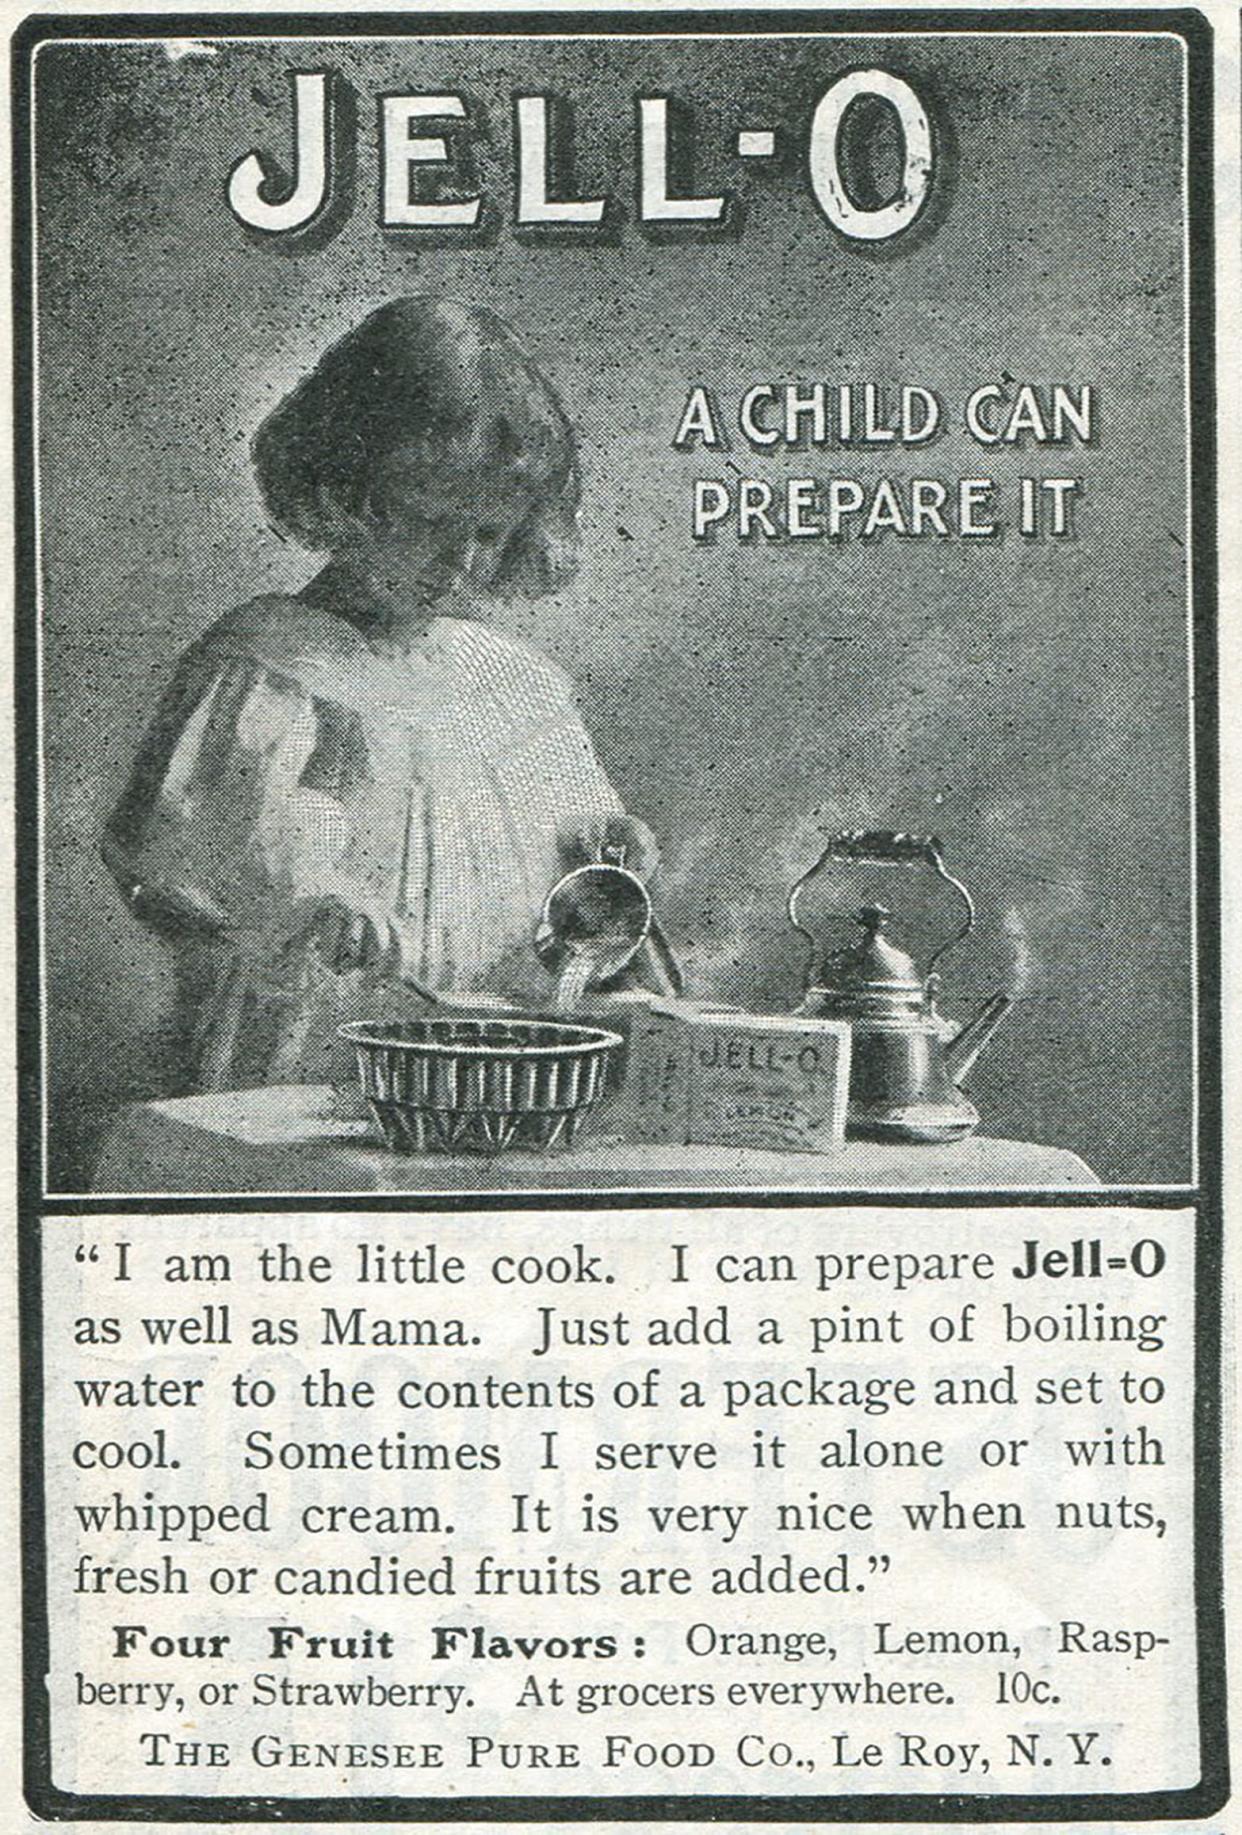 Black and white advertisement for Jell-O by the Genesee Pure Food Company in Le Roy, New York, a little girl is making Jell-O with the caption 'A Child Can Prepare It', 1903